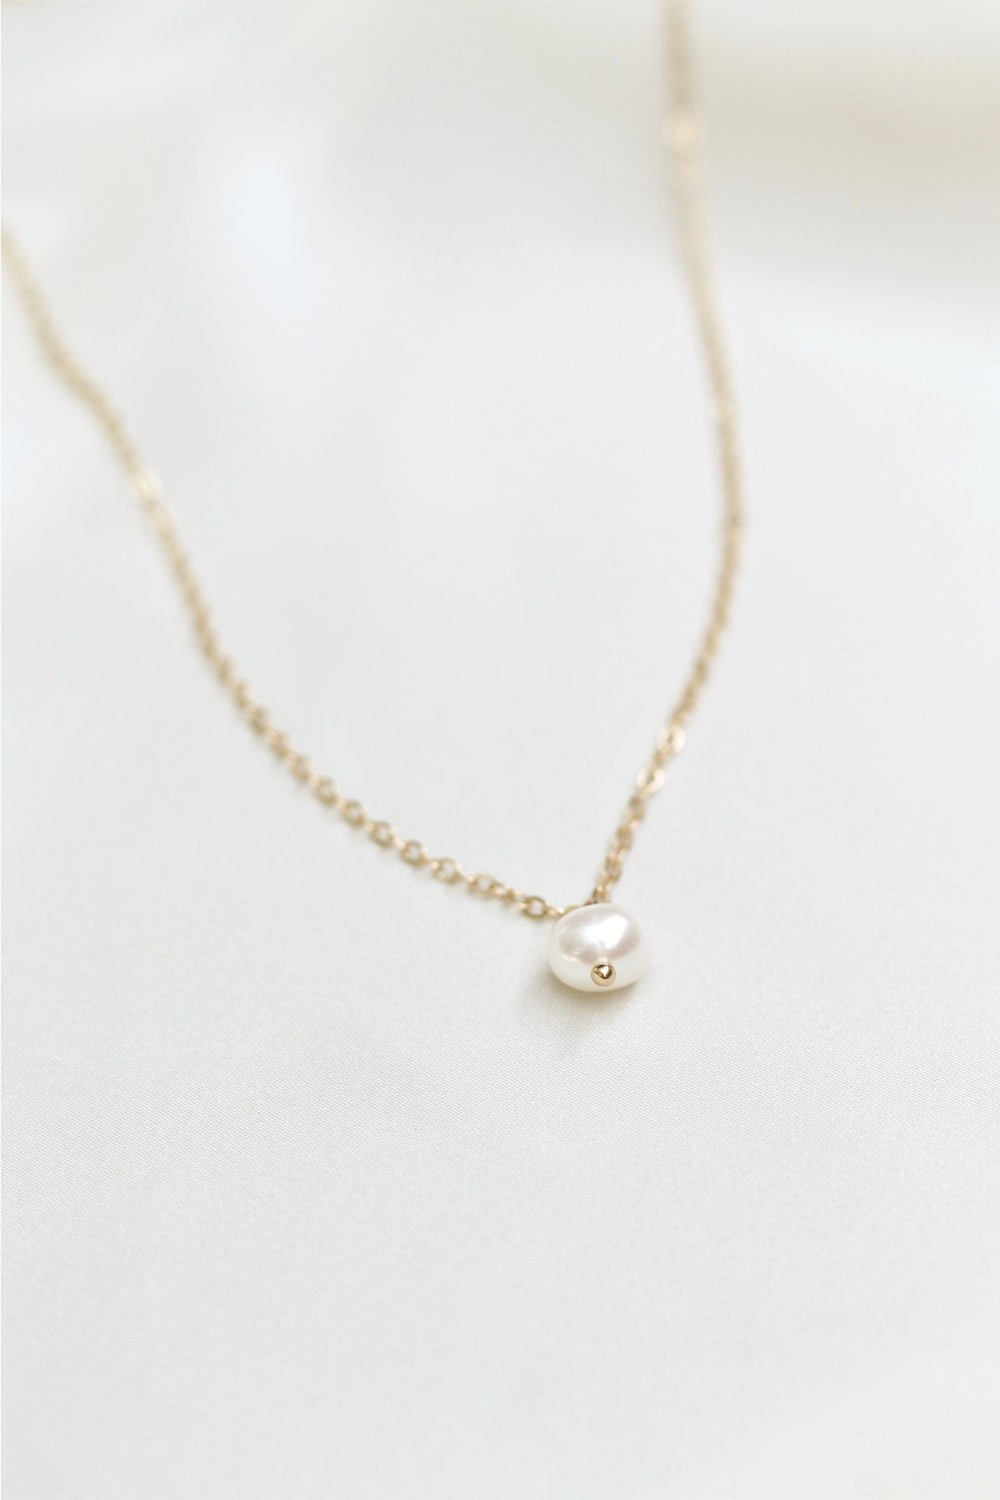 Dainty Pearl Necklace - Necklace - The Green Brick Boutique